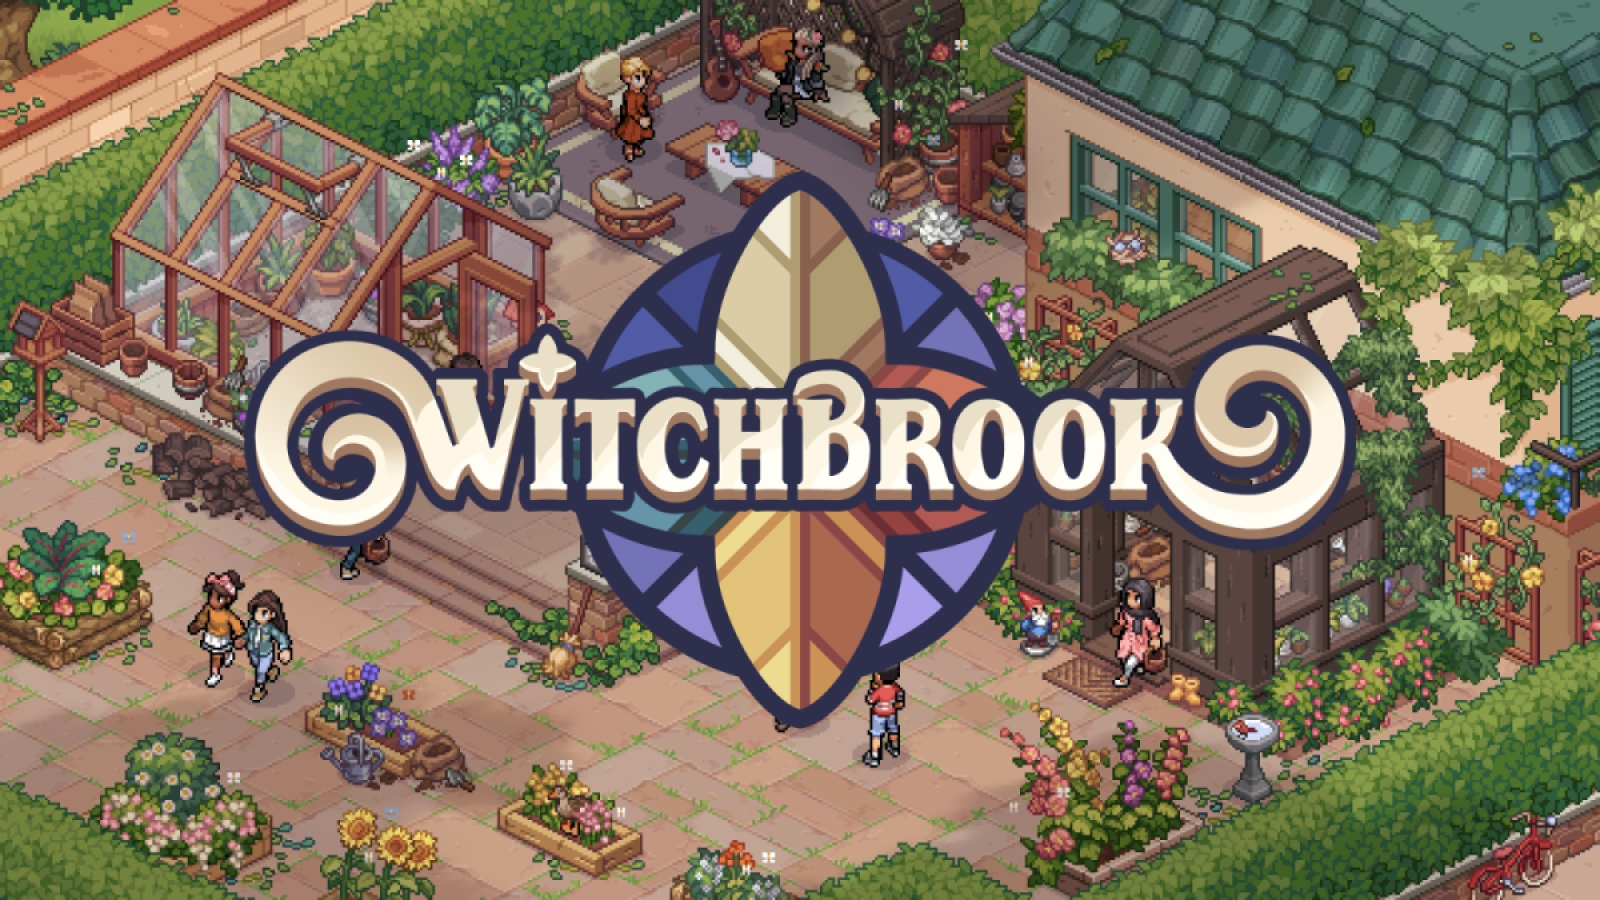 Witchbrook's logo